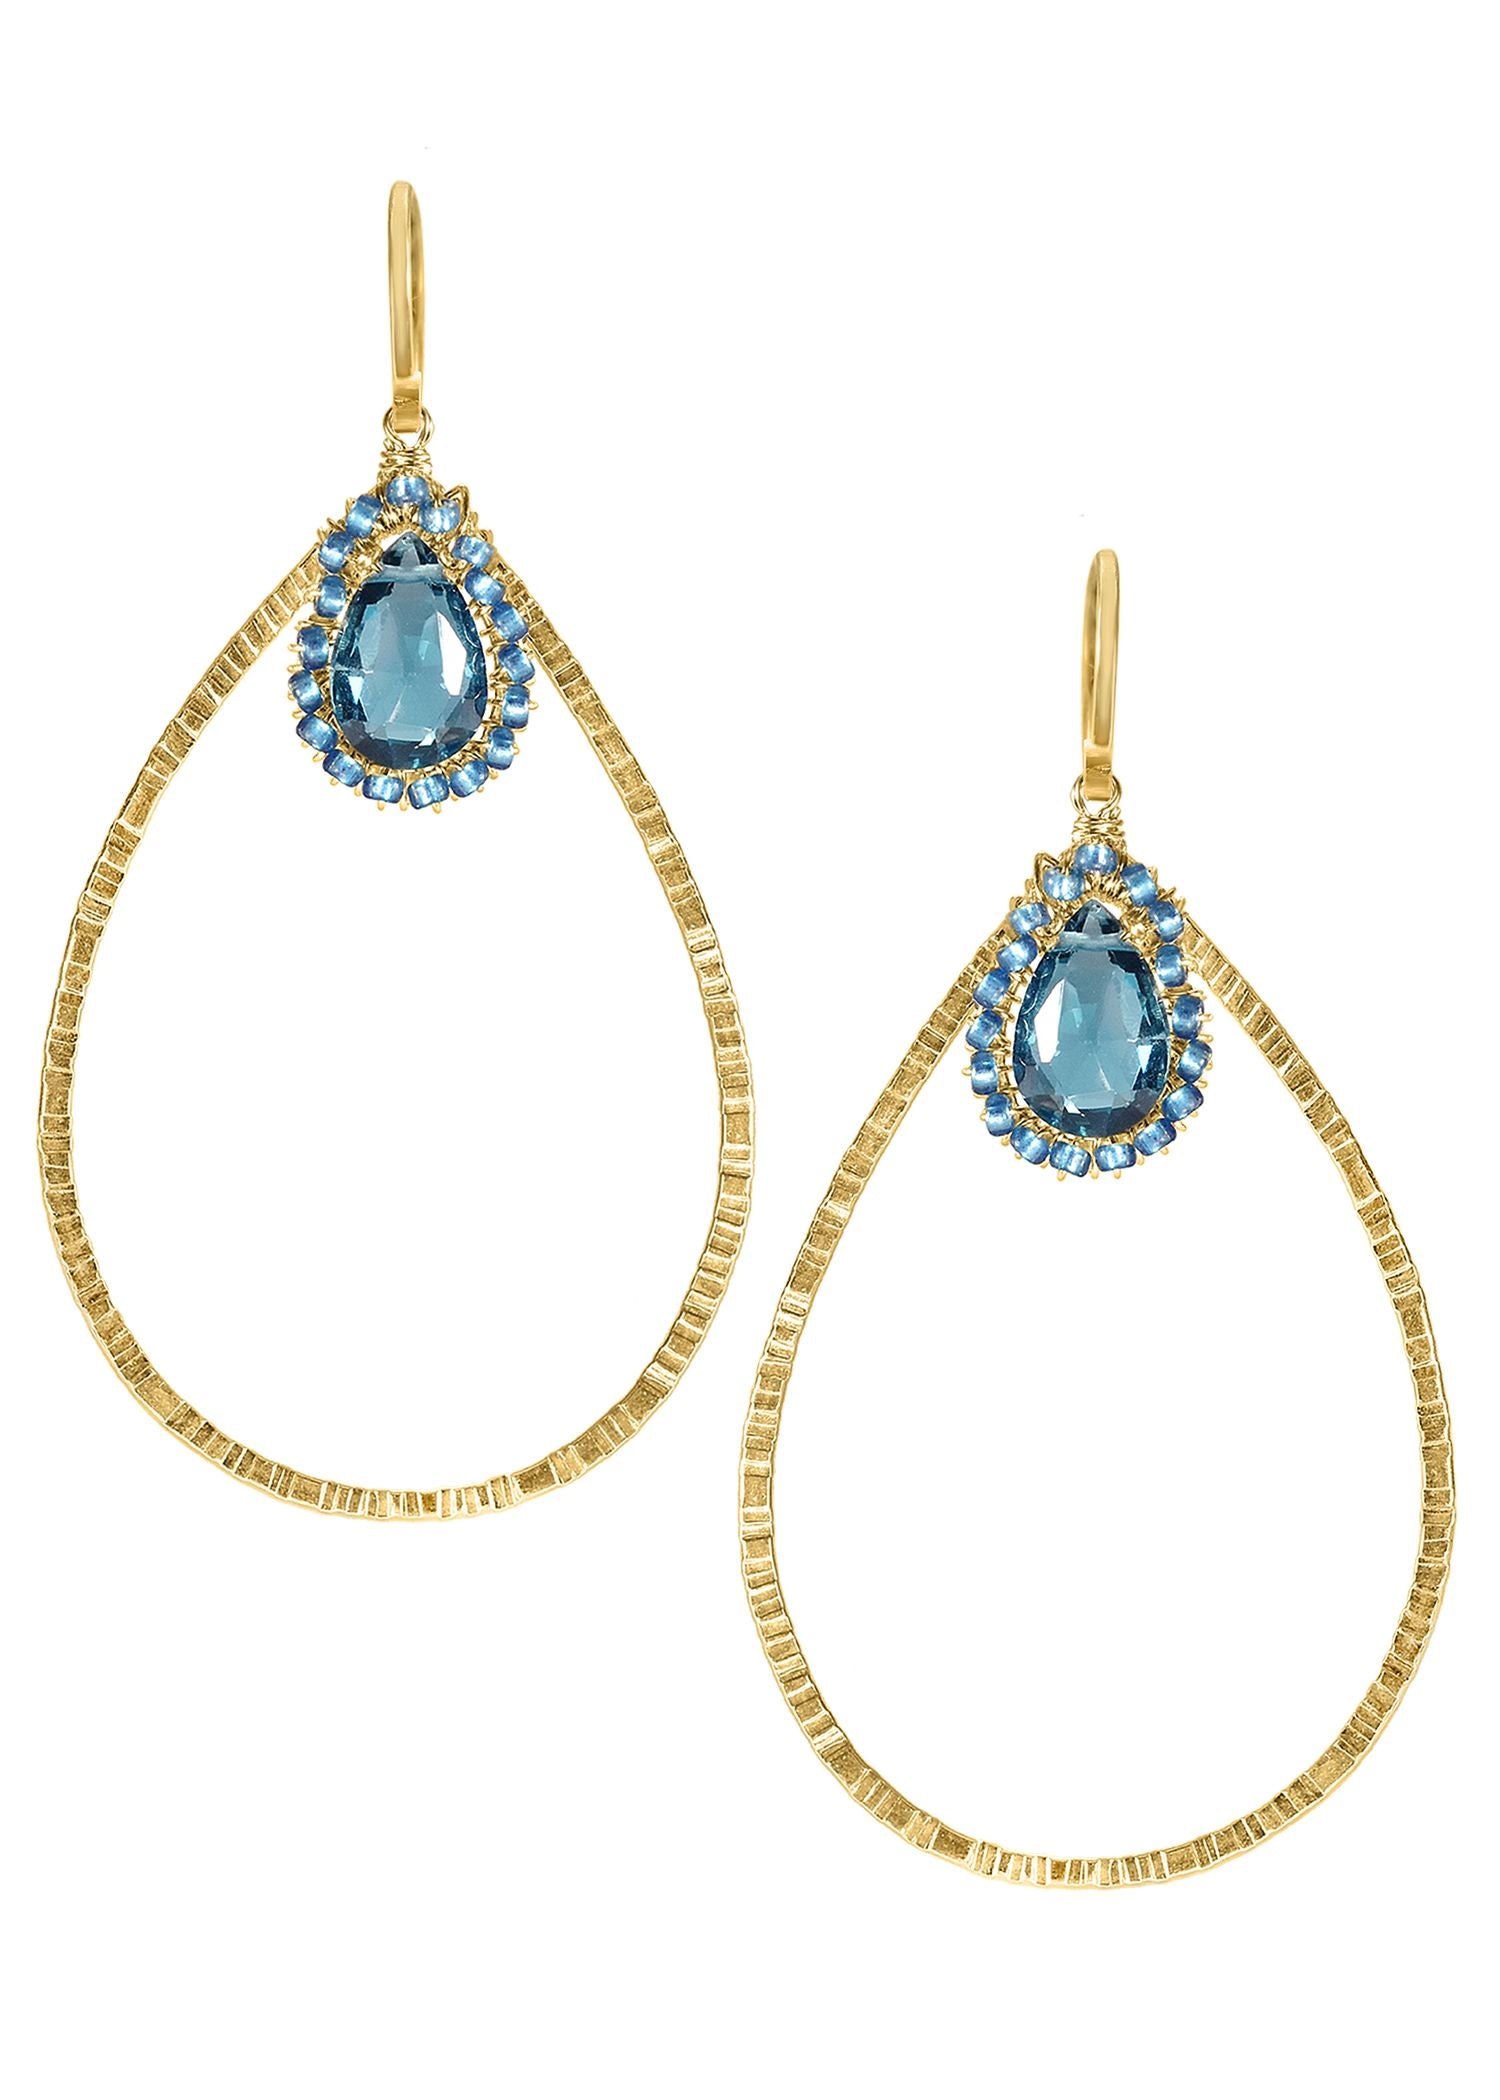 London blue quartz 14k gold fill Earrings measure 2" in length (including the ear wires) and 1-1/8" in width Handmade in our Los Angeles studio